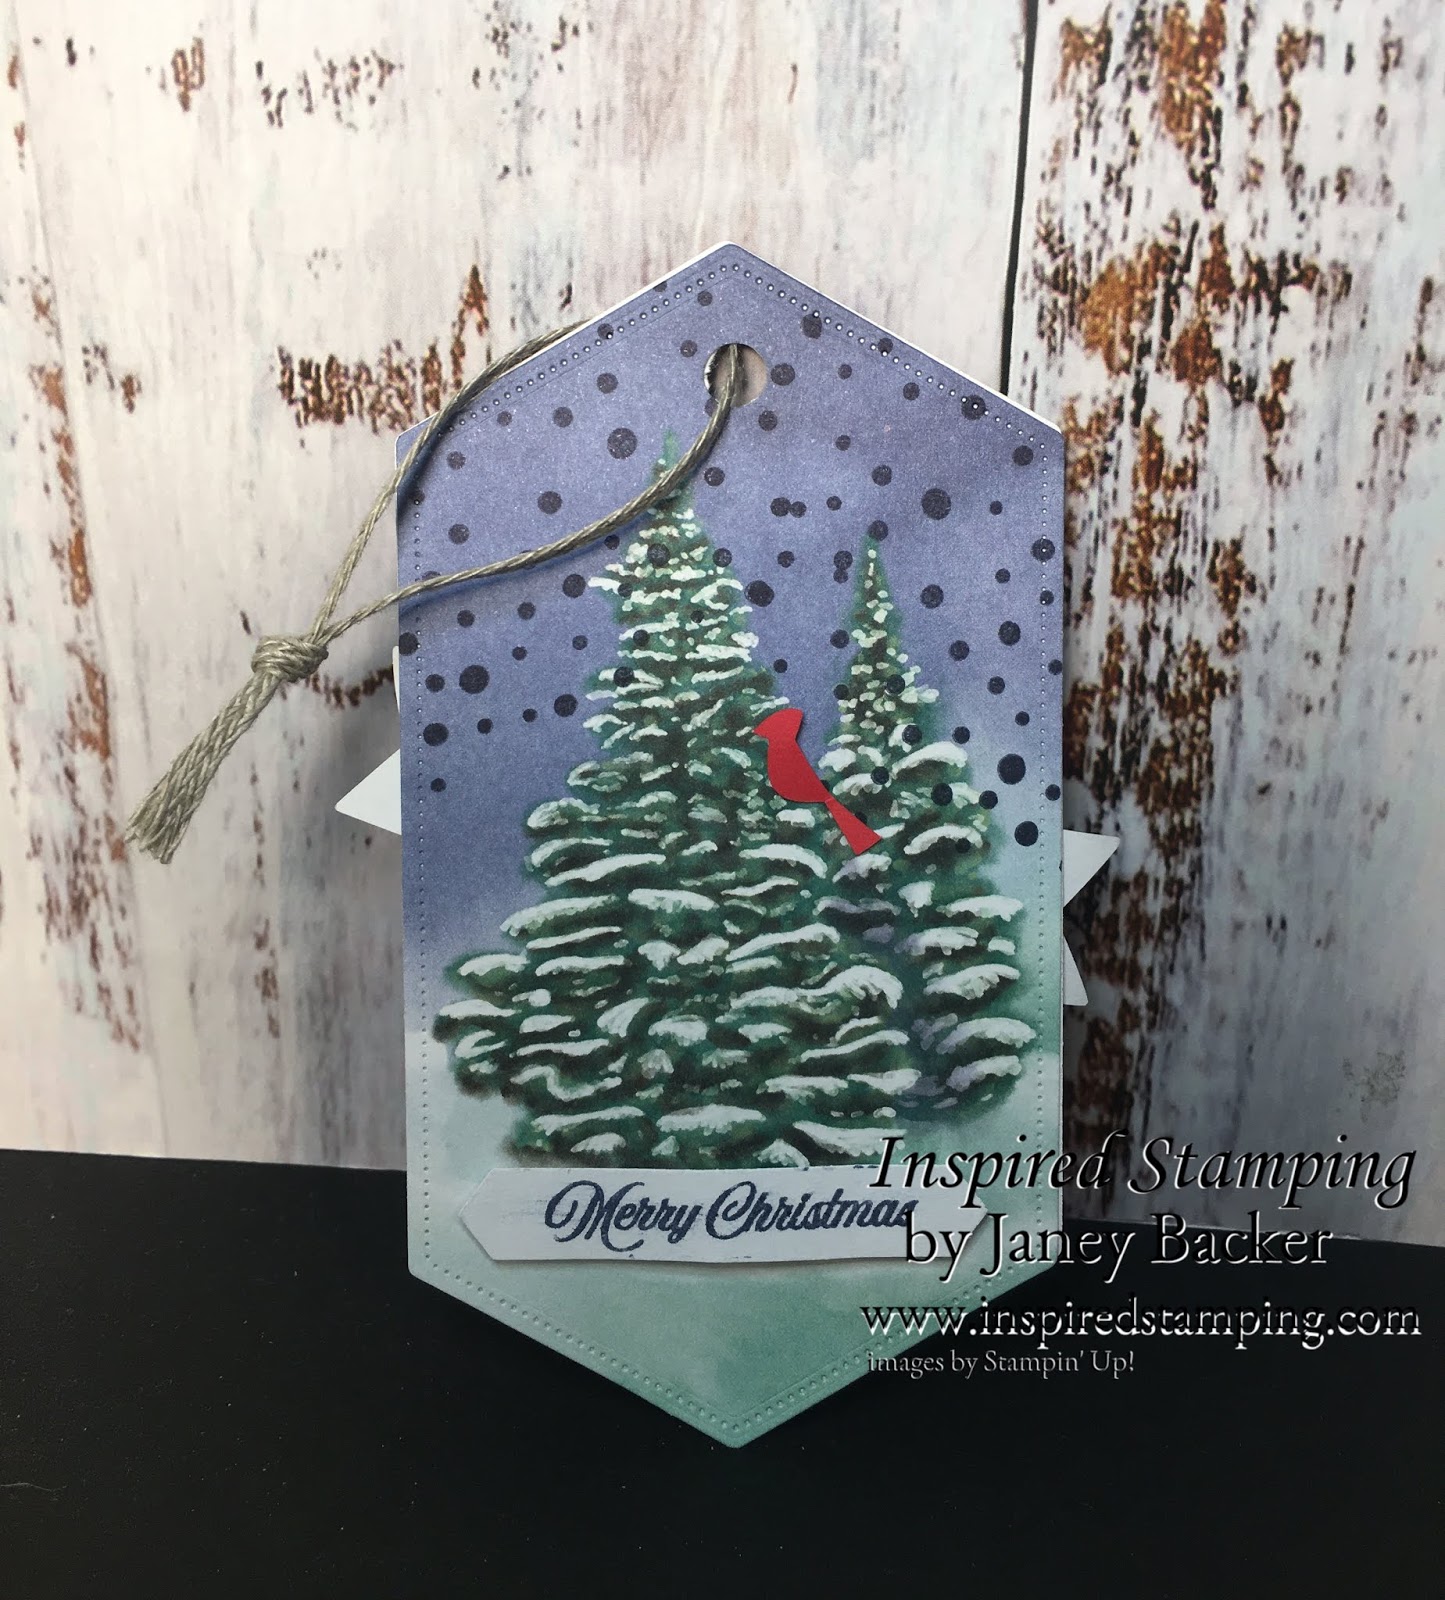 Inspired Stamping by Janey Backer: PPP Blog Hop Winter Woods